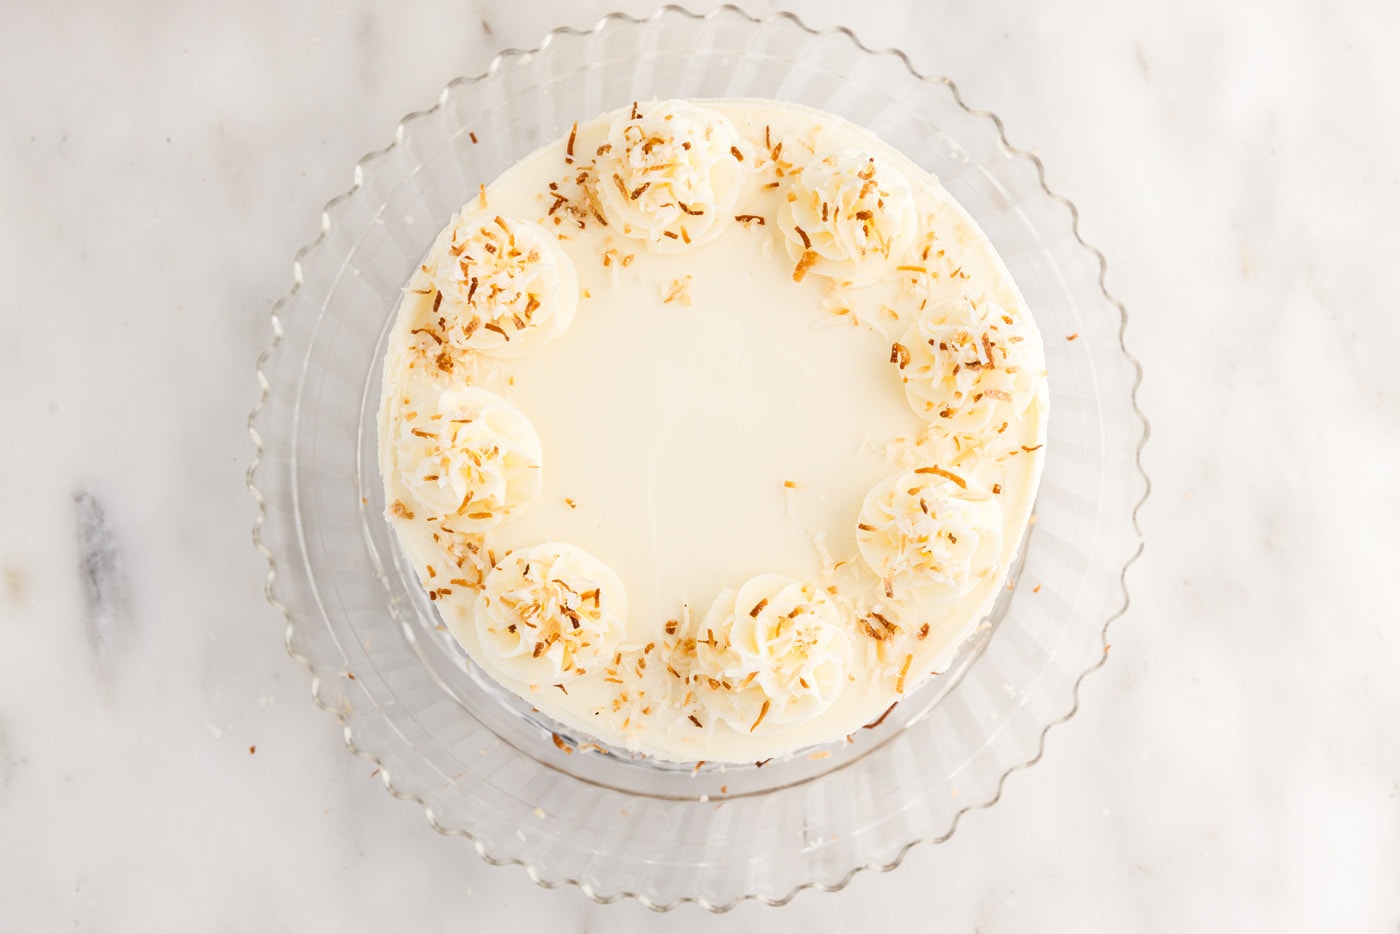 toasted coconut added on top of frosted pineapple coconut cake